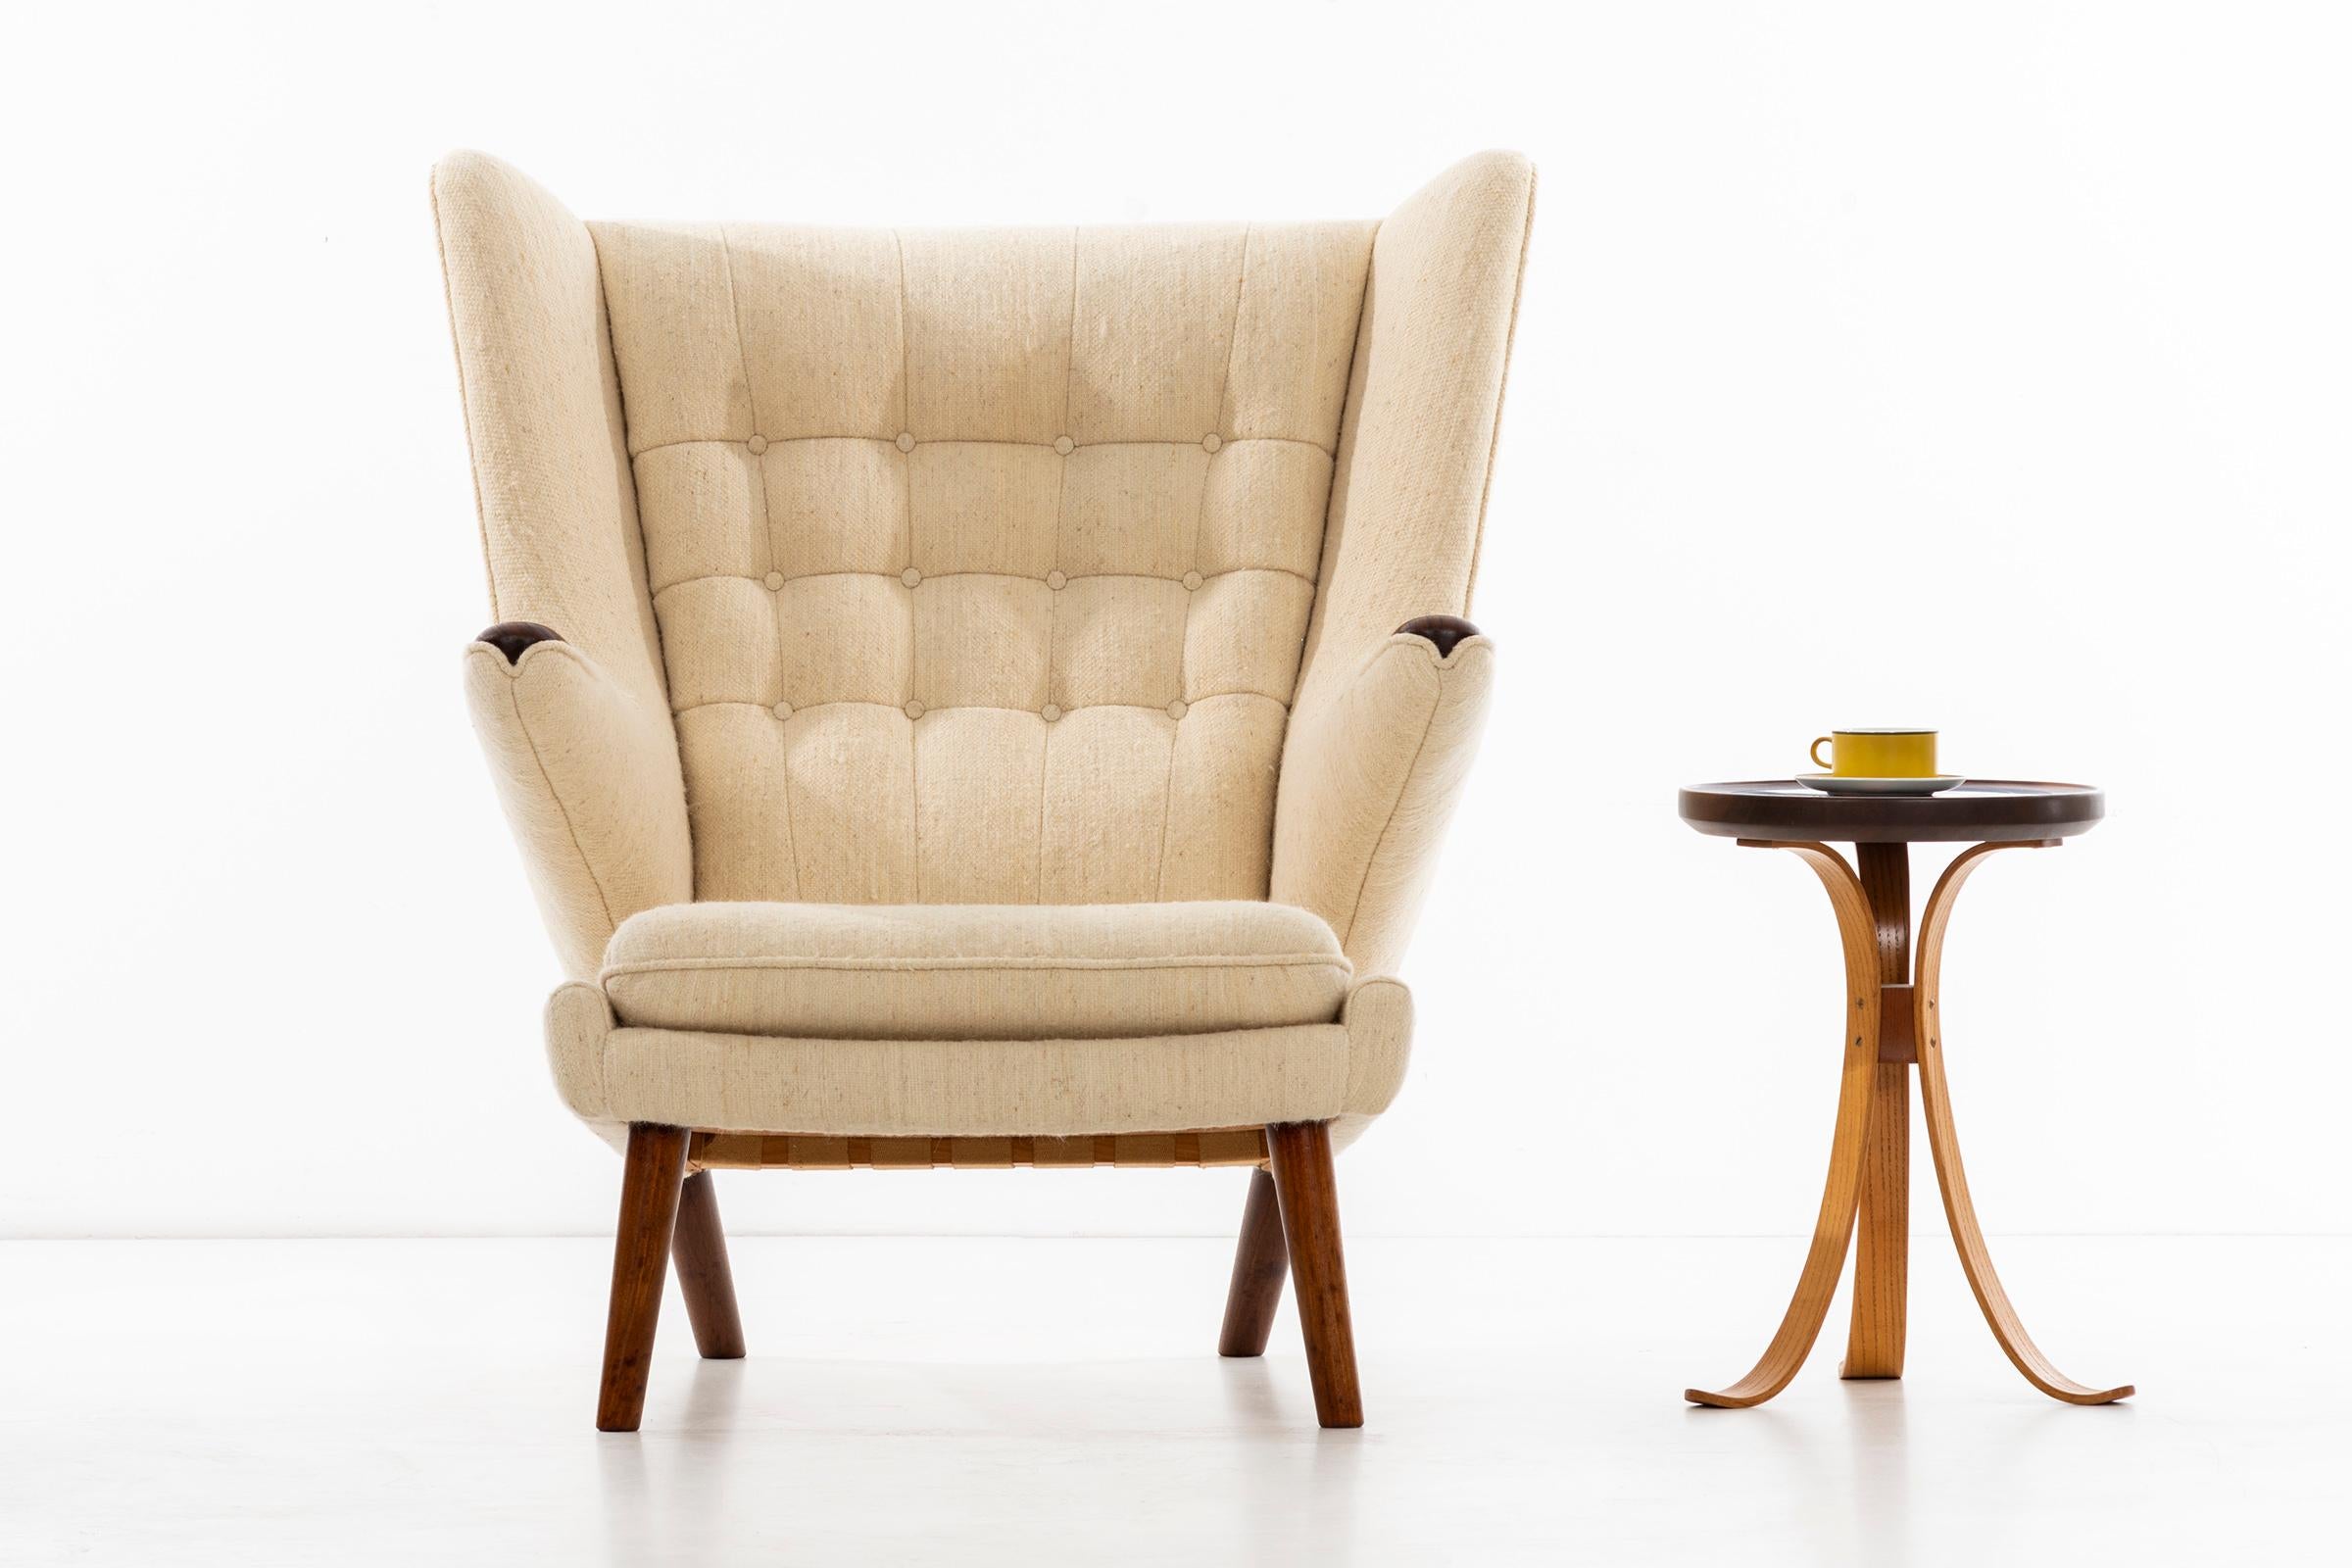 Hans Wegner Papa Bear lounge chair and ottoman, manufactured by A.P.Stolen.
This chair has been expertly recovered in vintage dead-stock Margit Pinter undyed wool upholstery fabric, sourced by Interior architects Powell/ Kleinschmidt, handwoven by